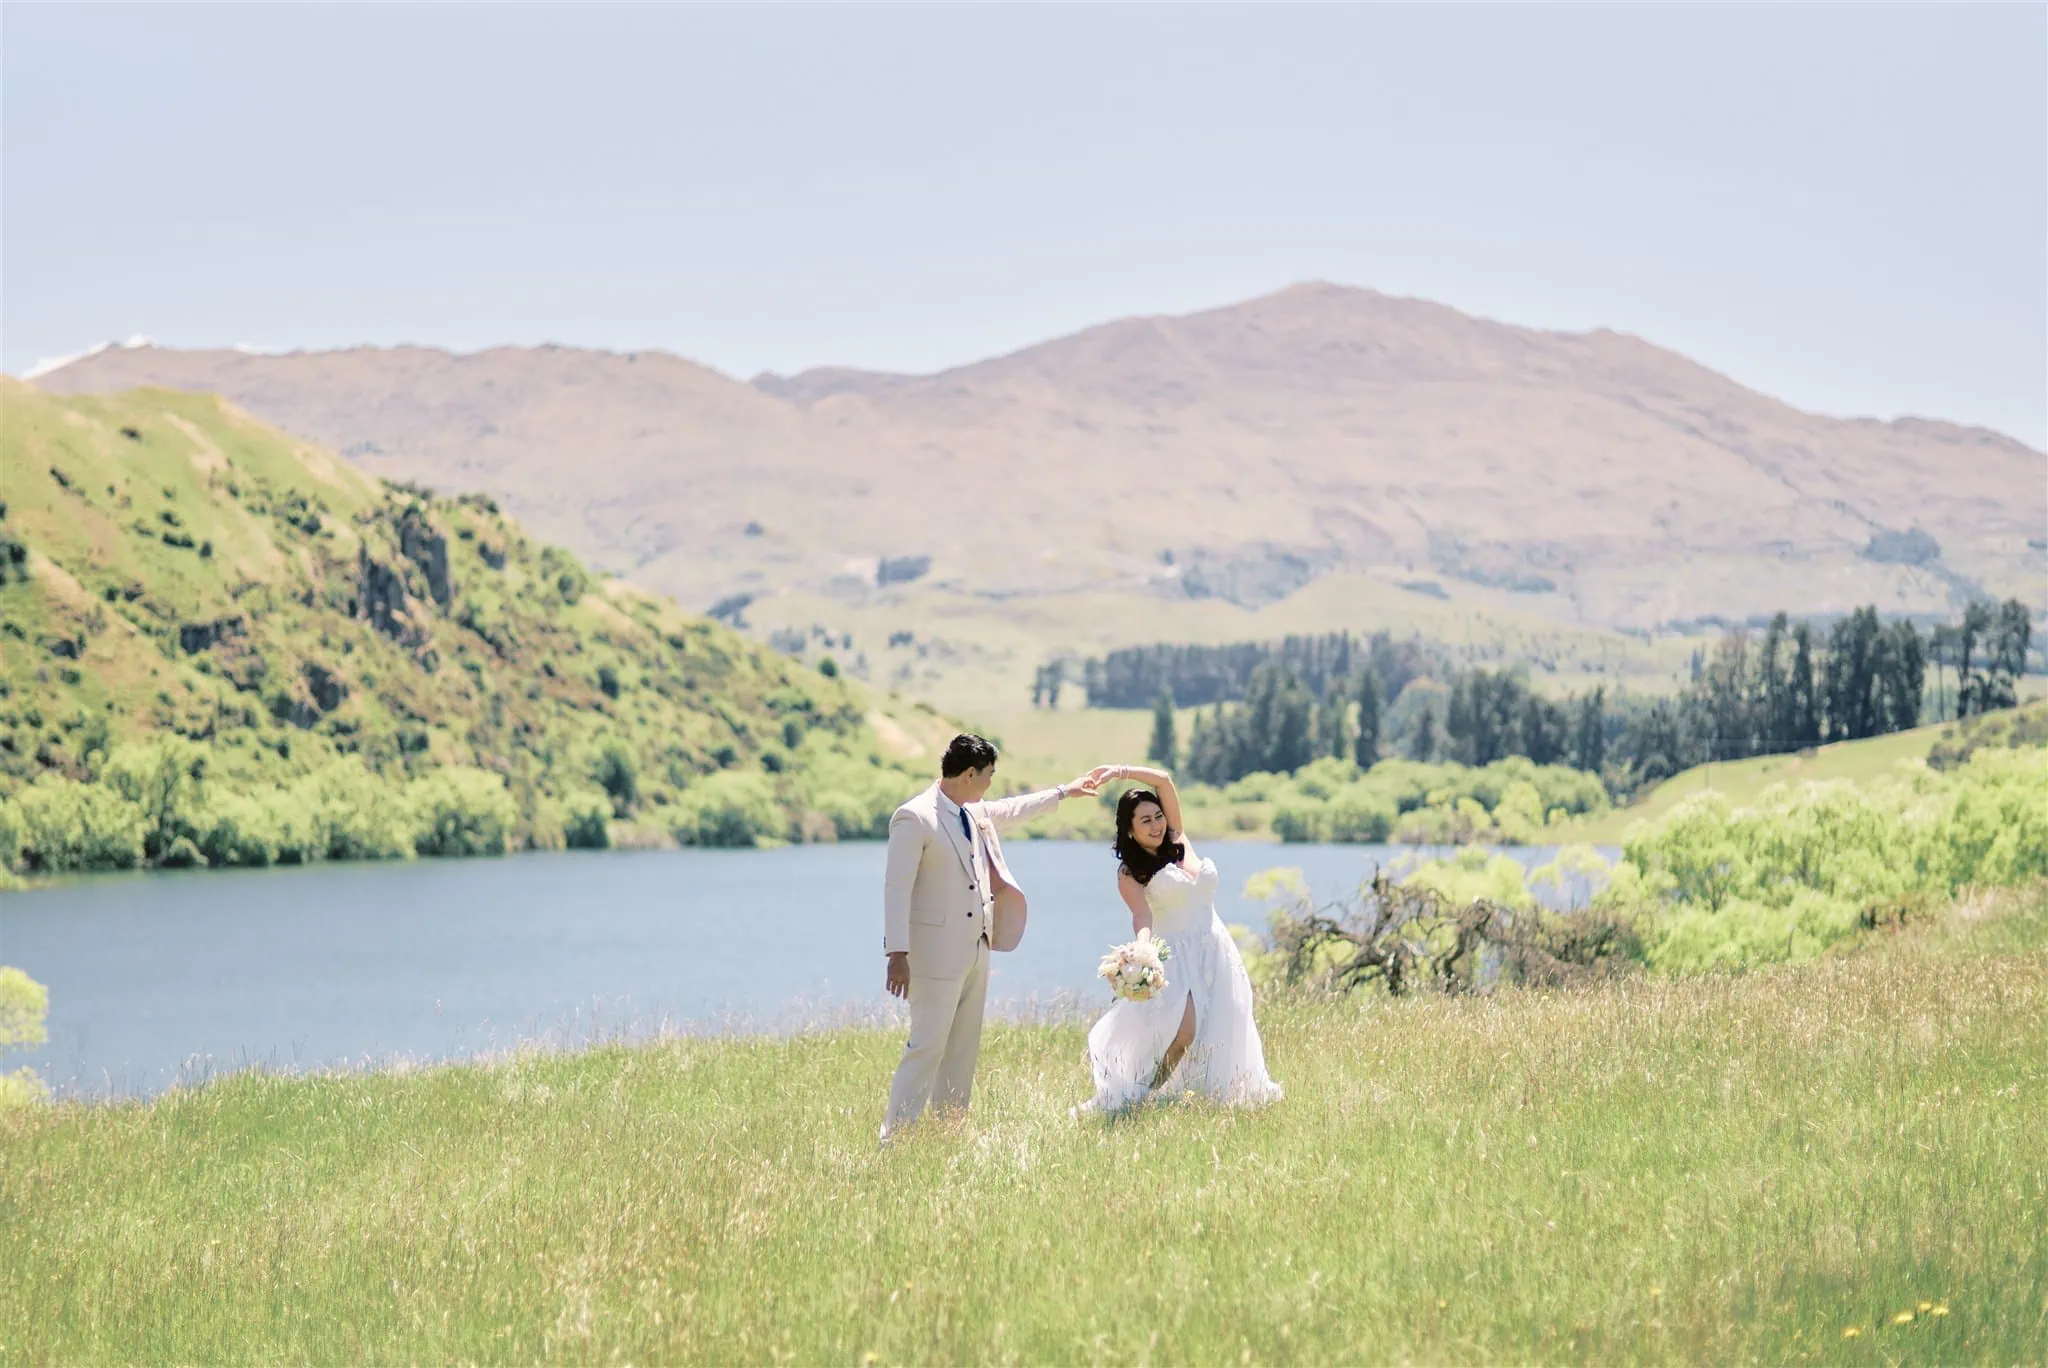 Queenstown Elopement Heli Wedding Photographer クイーンズタウン結婚式 | A man and woman having a romantic Queenstown elopement in a field with majestic mountains in the background.